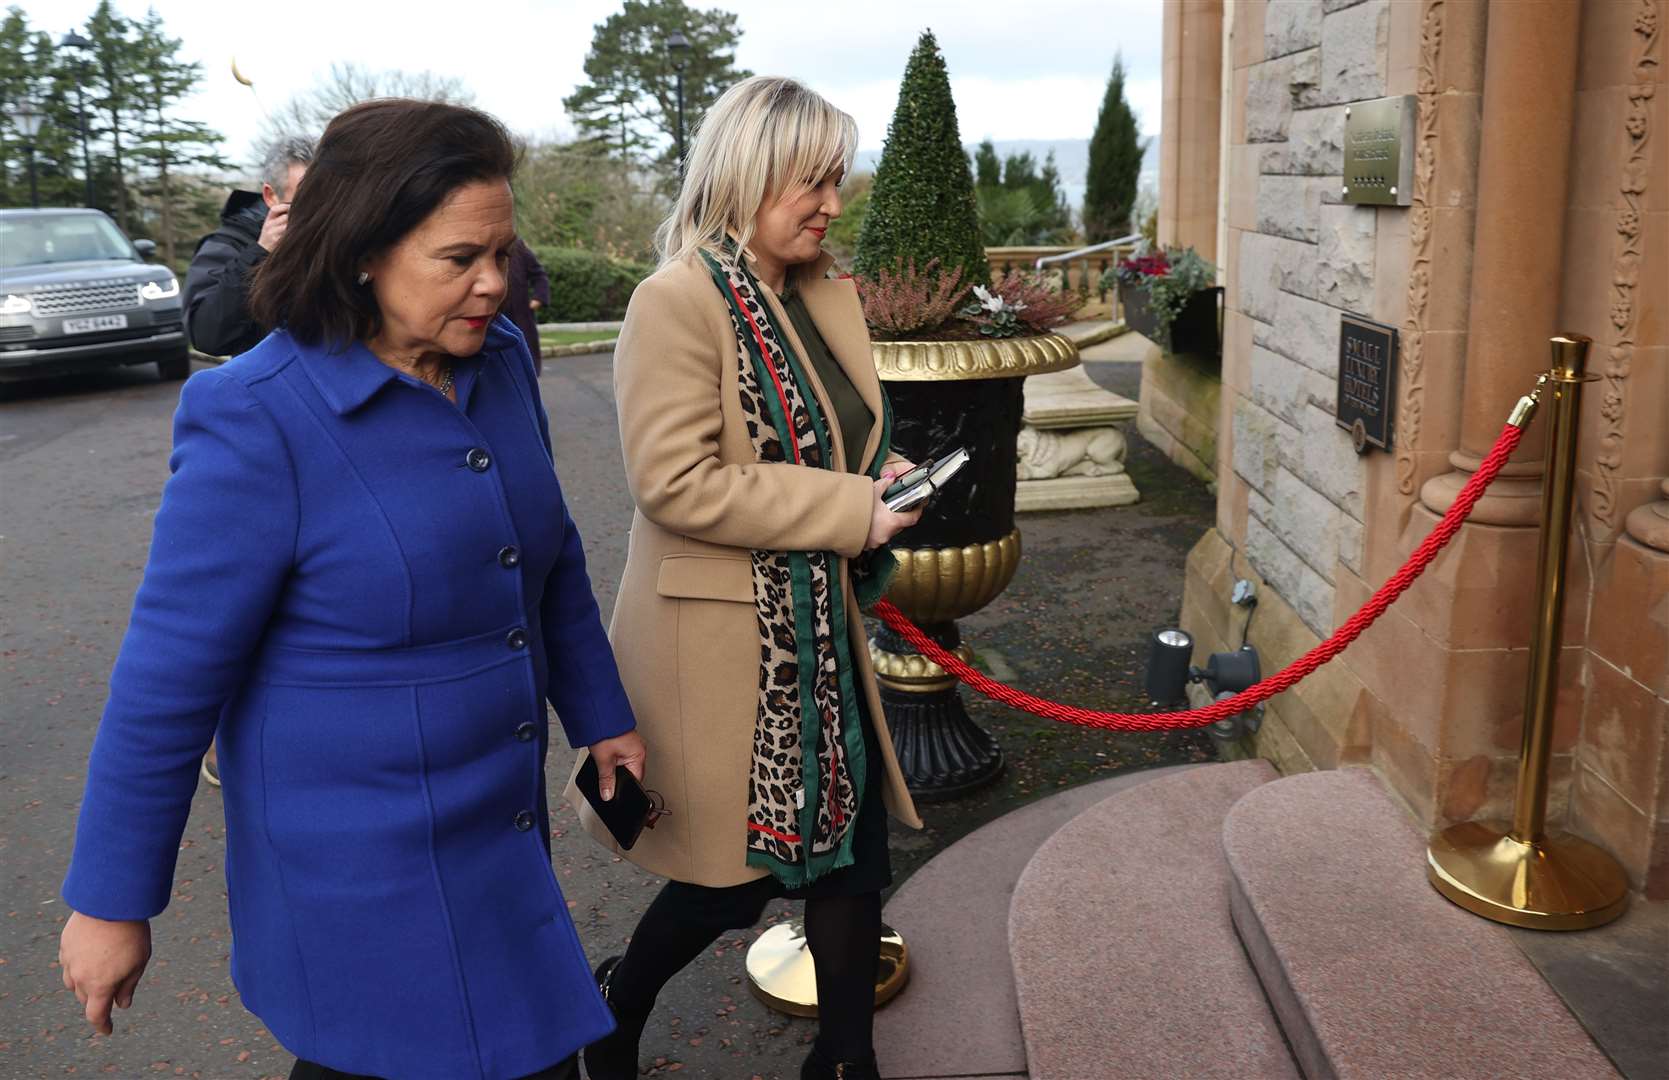 Sinn Fein Party leader Mary Lou McDonald (left) and vice president Michelle O’Neill arrive at the Culloden Hotel to meet Prime Minister Rishi Sunak (Liam McBurney/PA).